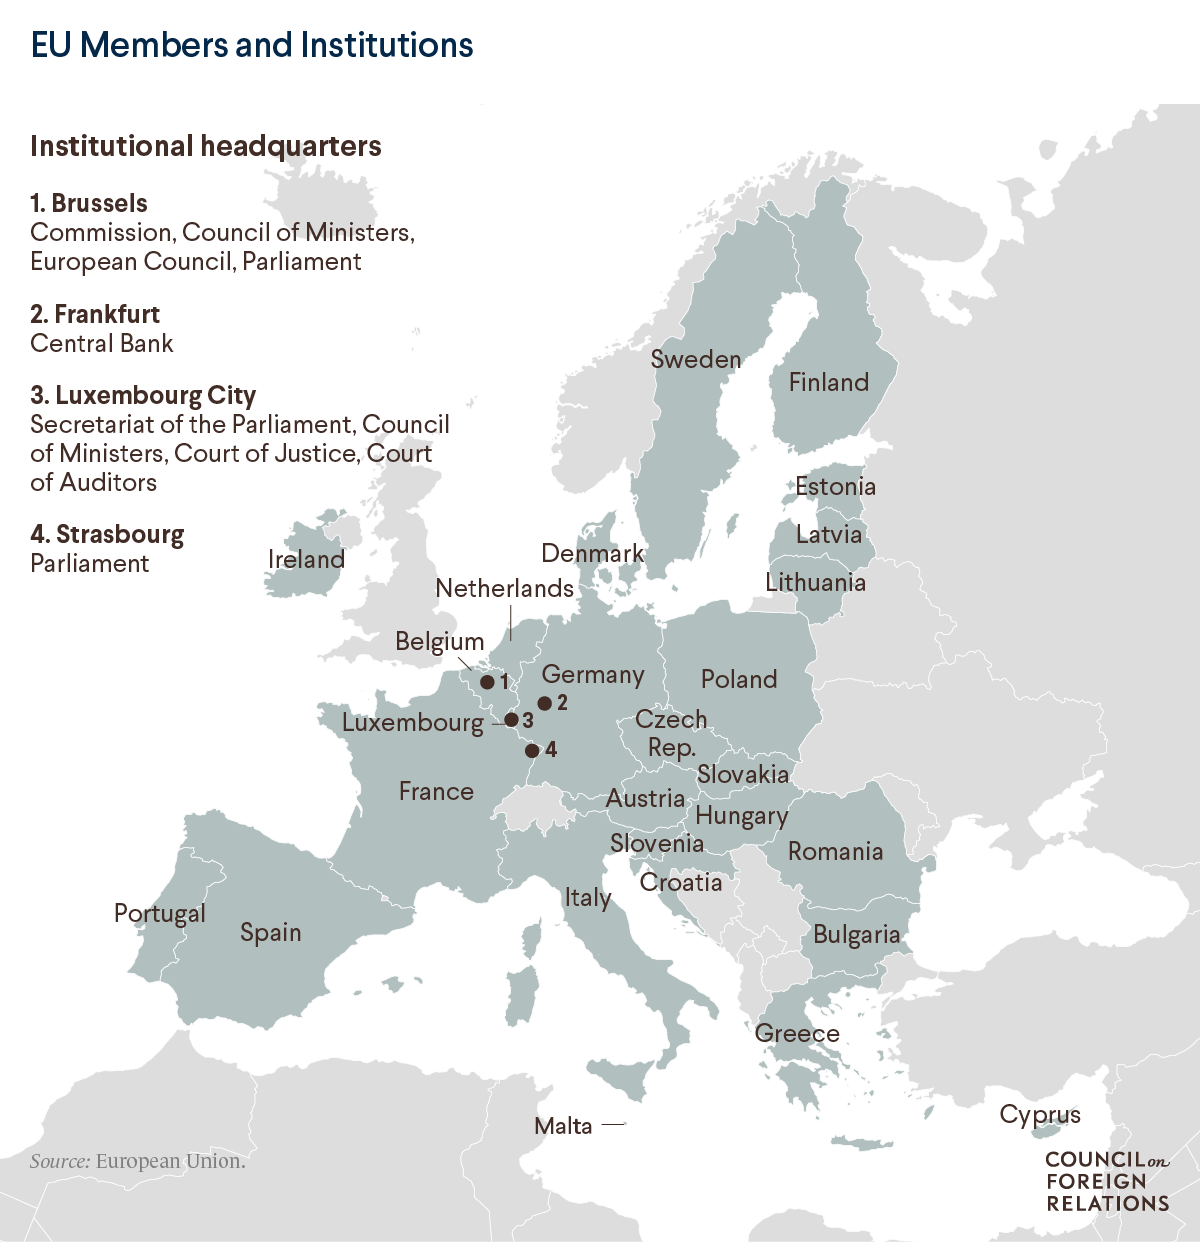 A map of EU members and institutions